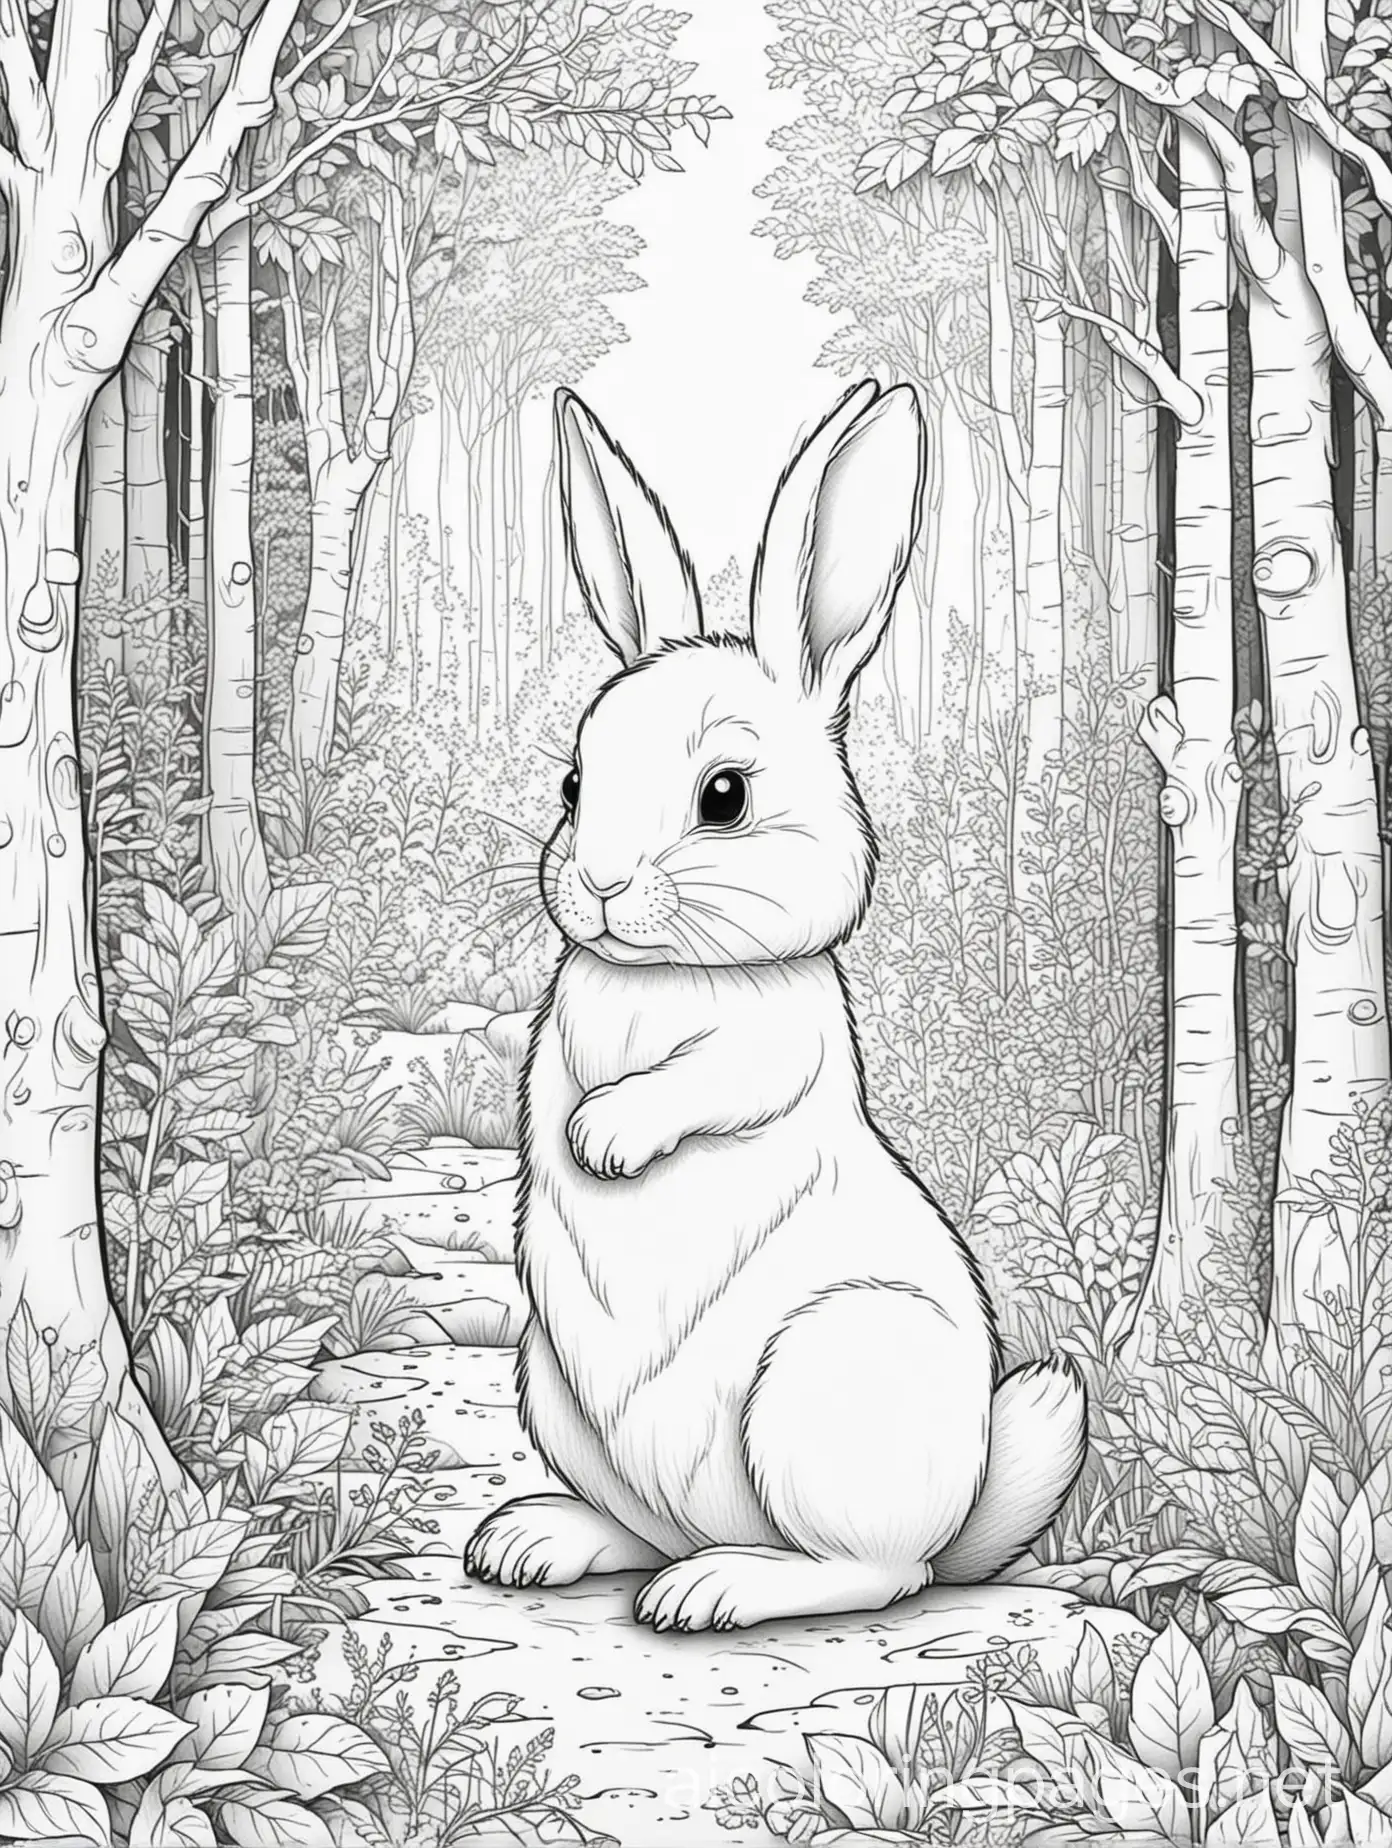 Forest-Rabbit-Coloring-Page-Simple-Black-and-White-Line-Art-for-Kids